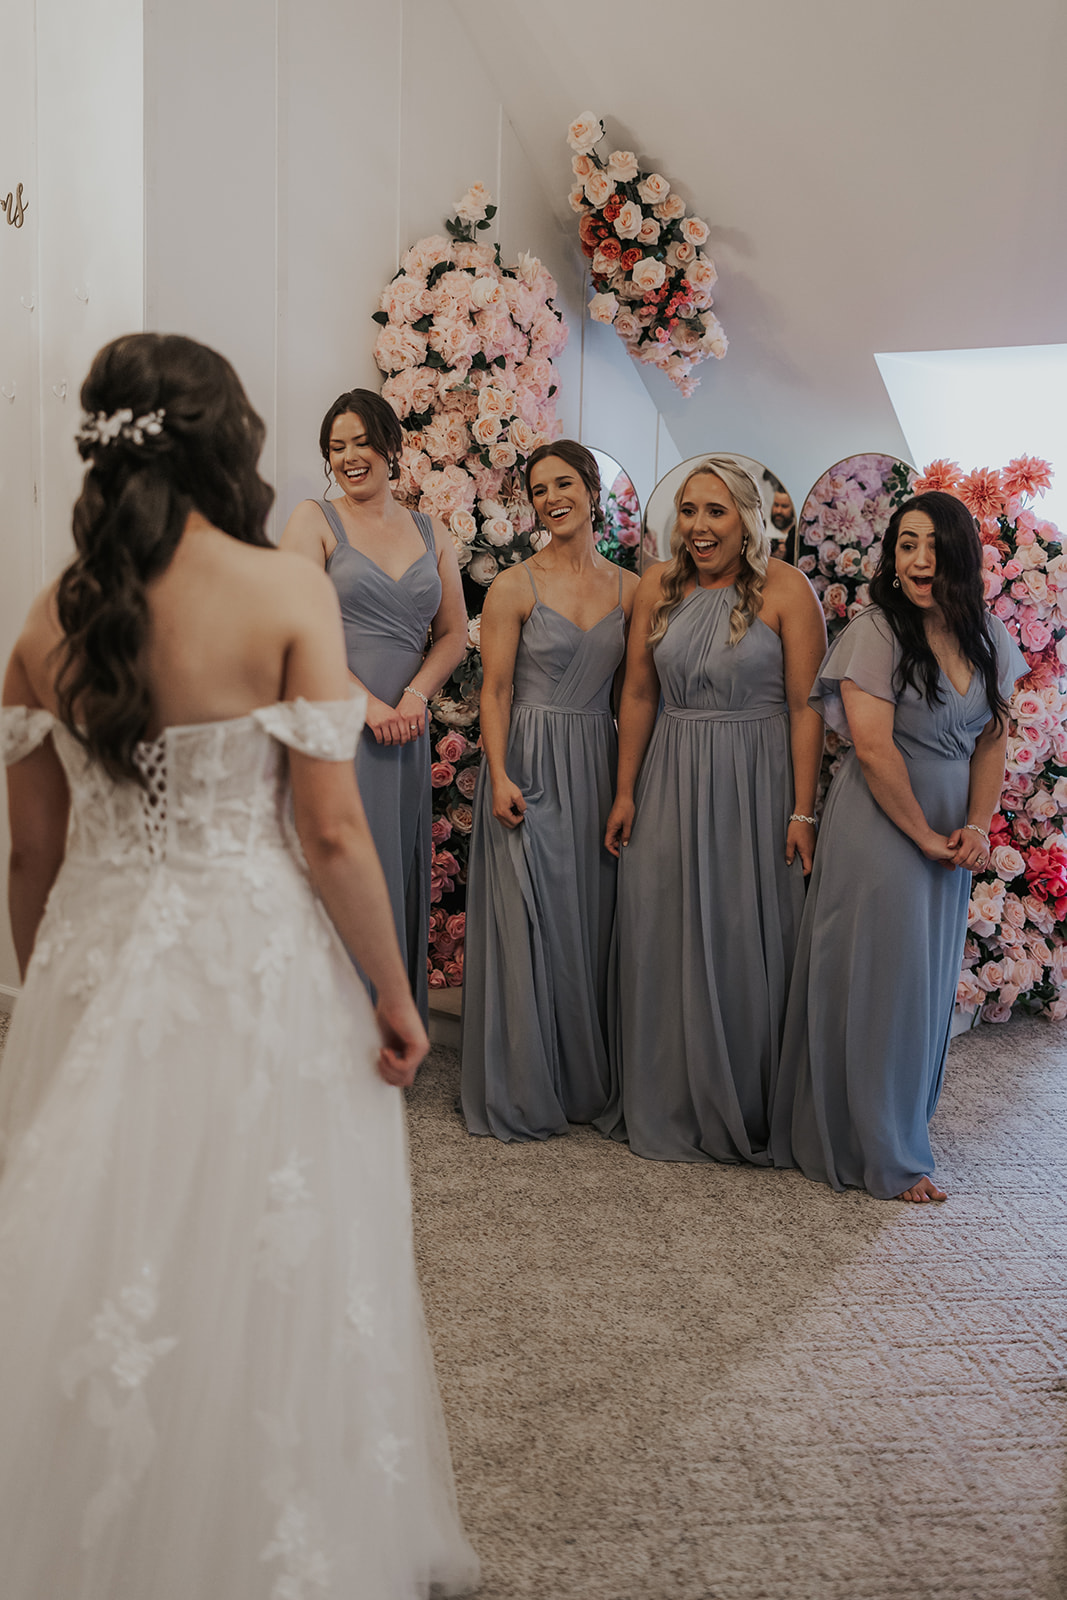 Bridesmaids react to seeing stunning bride for the first time on her wedding day